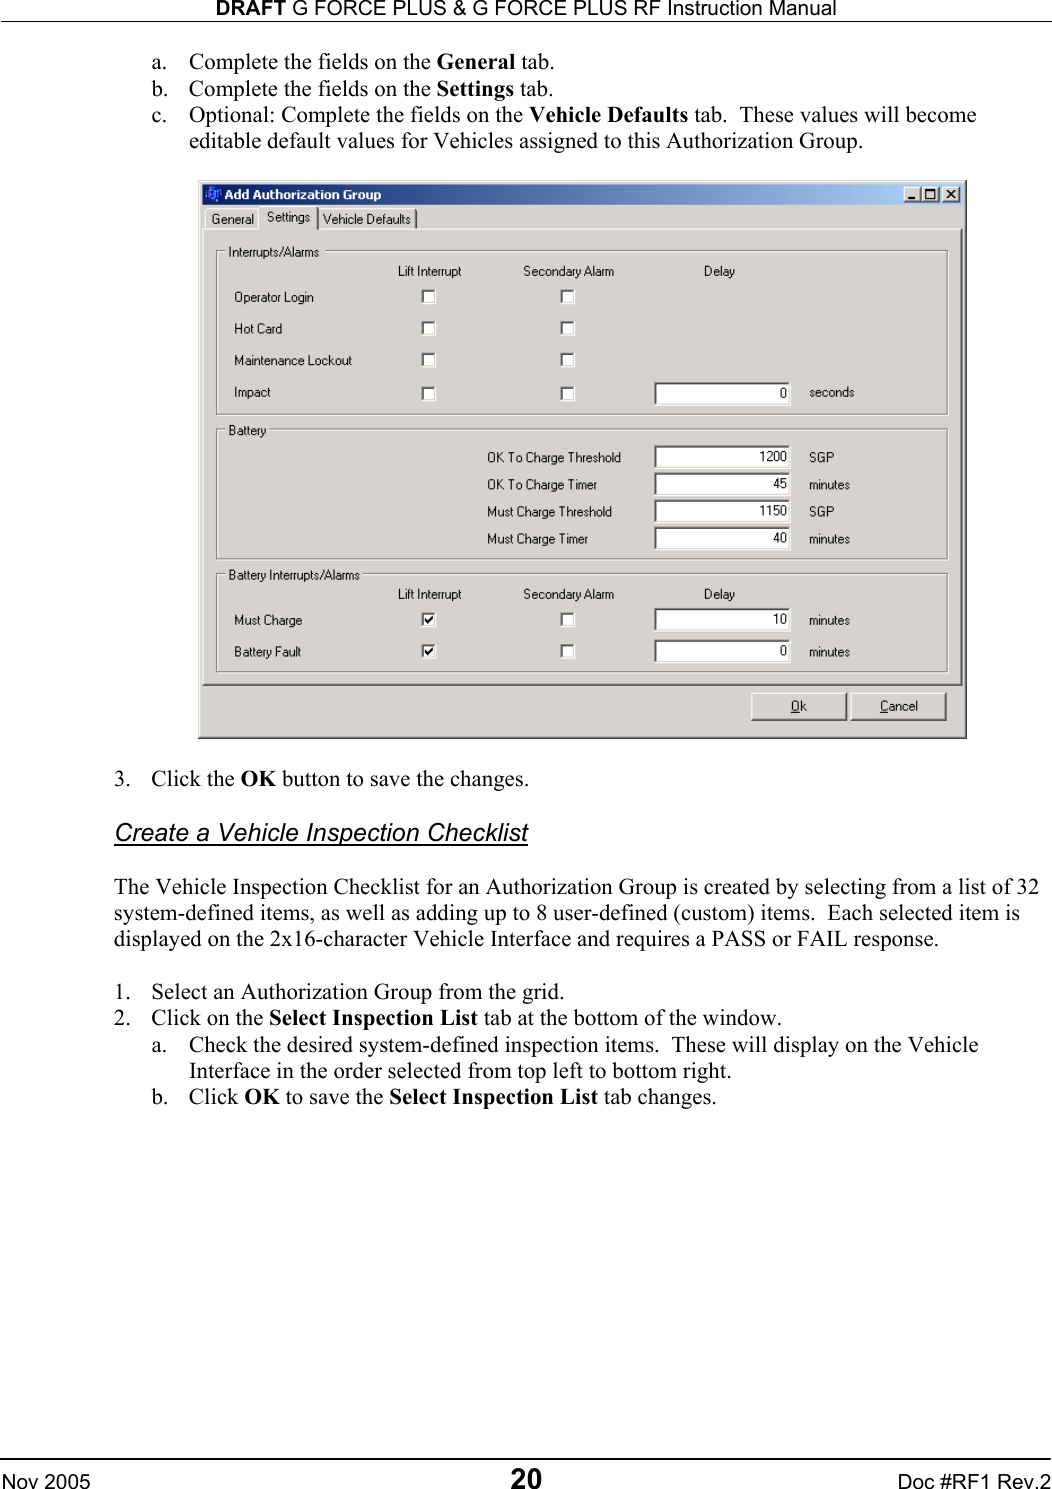 DRAFT G FORCE PLUS &amp; G FORCE PLUS RF Instruction Manual   Nov 2005 20 Doc #RF1 Rev.2 a.  Complete the fields on the General tab. b.  Complete the fields on the Settings tab. c.  Optional: Complete the fields on the Vehicle Defaults tab.  These values will become editable default values for Vehicles assigned to this Authorization Group.    3. Click the OK button to save the changes.  Create a Vehicle Inspection Checklist  The Vehicle Inspection Checklist for an Authorization Group is created by selecting from a list of 32 system-defined items, as well as adding up to 8 user-defined (custom) items.  Each selected item is displayed on the 2x16-character Vehicle Interface and requires a PASS or FAIL response.  1.  Select an Authorization Group from the grid. 2.  Click on the Select Inspection List tab at the bottom of the window. a.  Check the desired system-defined inspection items.  These will display on the Vehicle Interface in the order selected from top left to bottom right.  b. Click OK to save the Select Inspection List tab changes.  